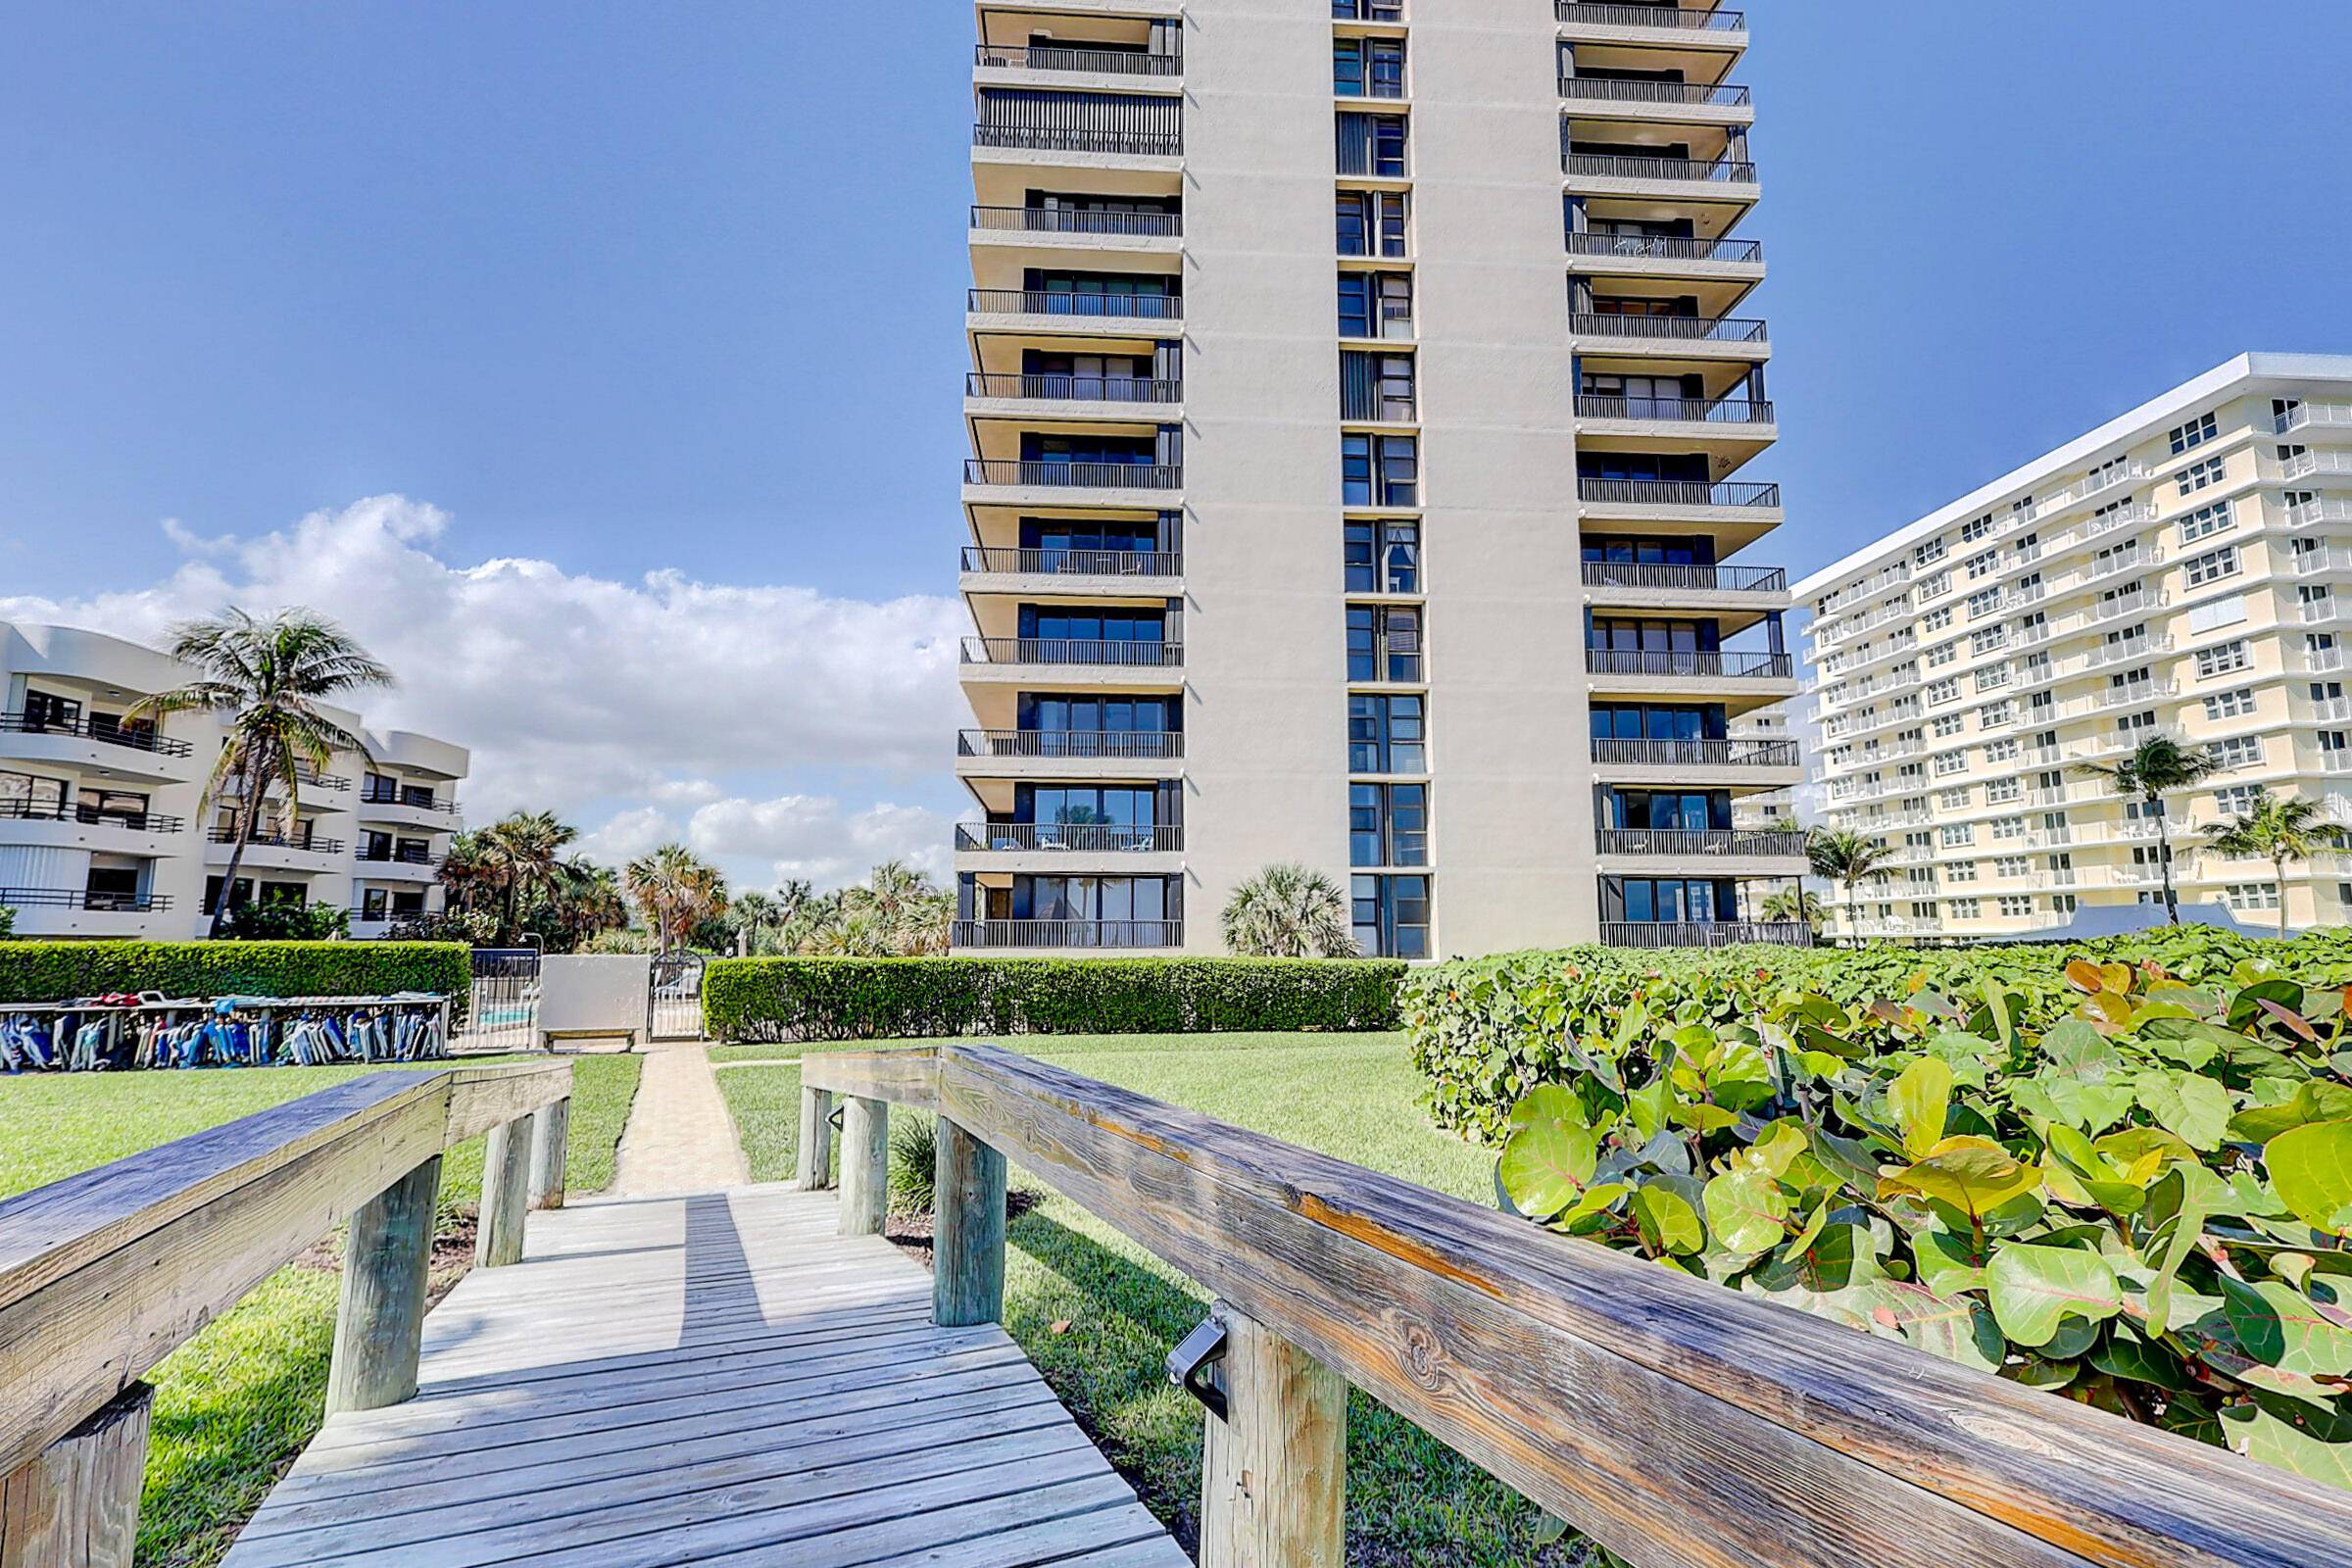 OFF SEASONAL RENTAL ONLY, 5 1 24 This stunning 10th floor condo boasts breathtaking ocean views that will take your breath away !